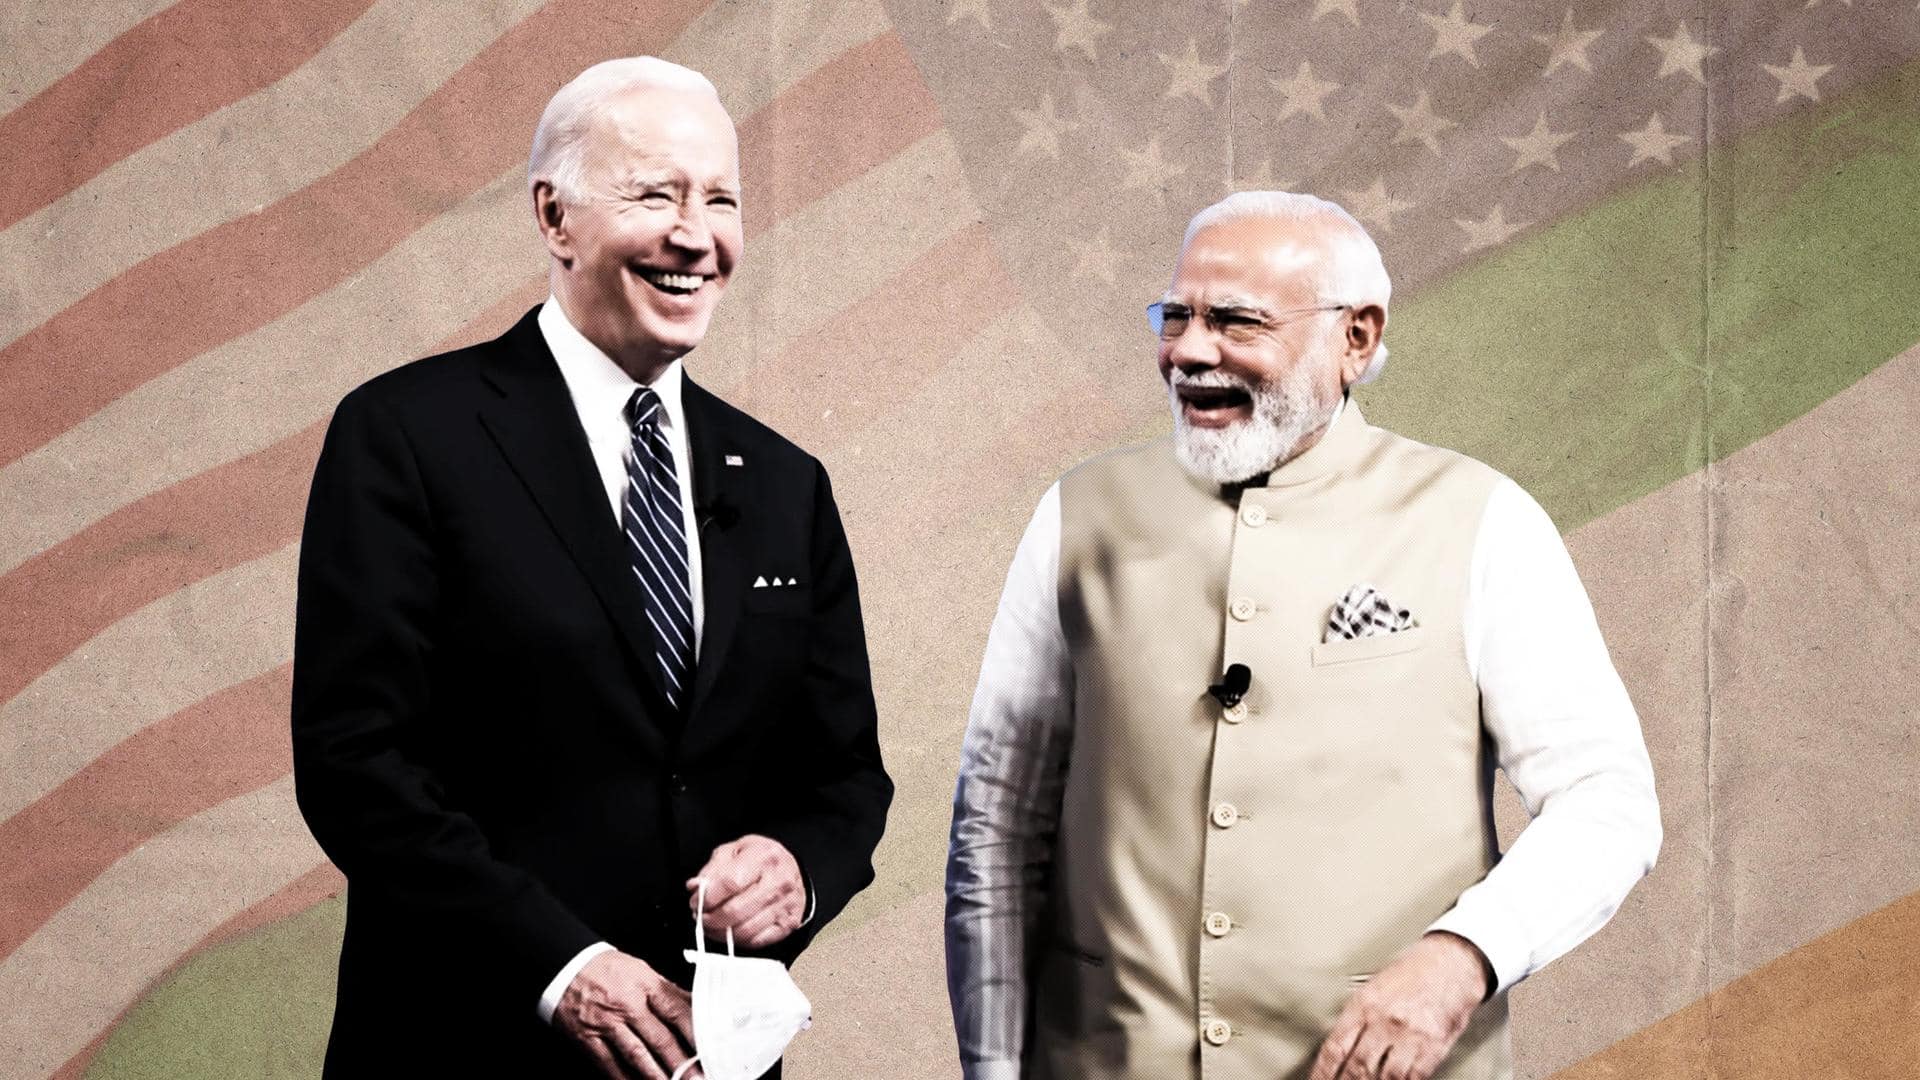 Go see for yourself: US praises 'health' of Indian democracy